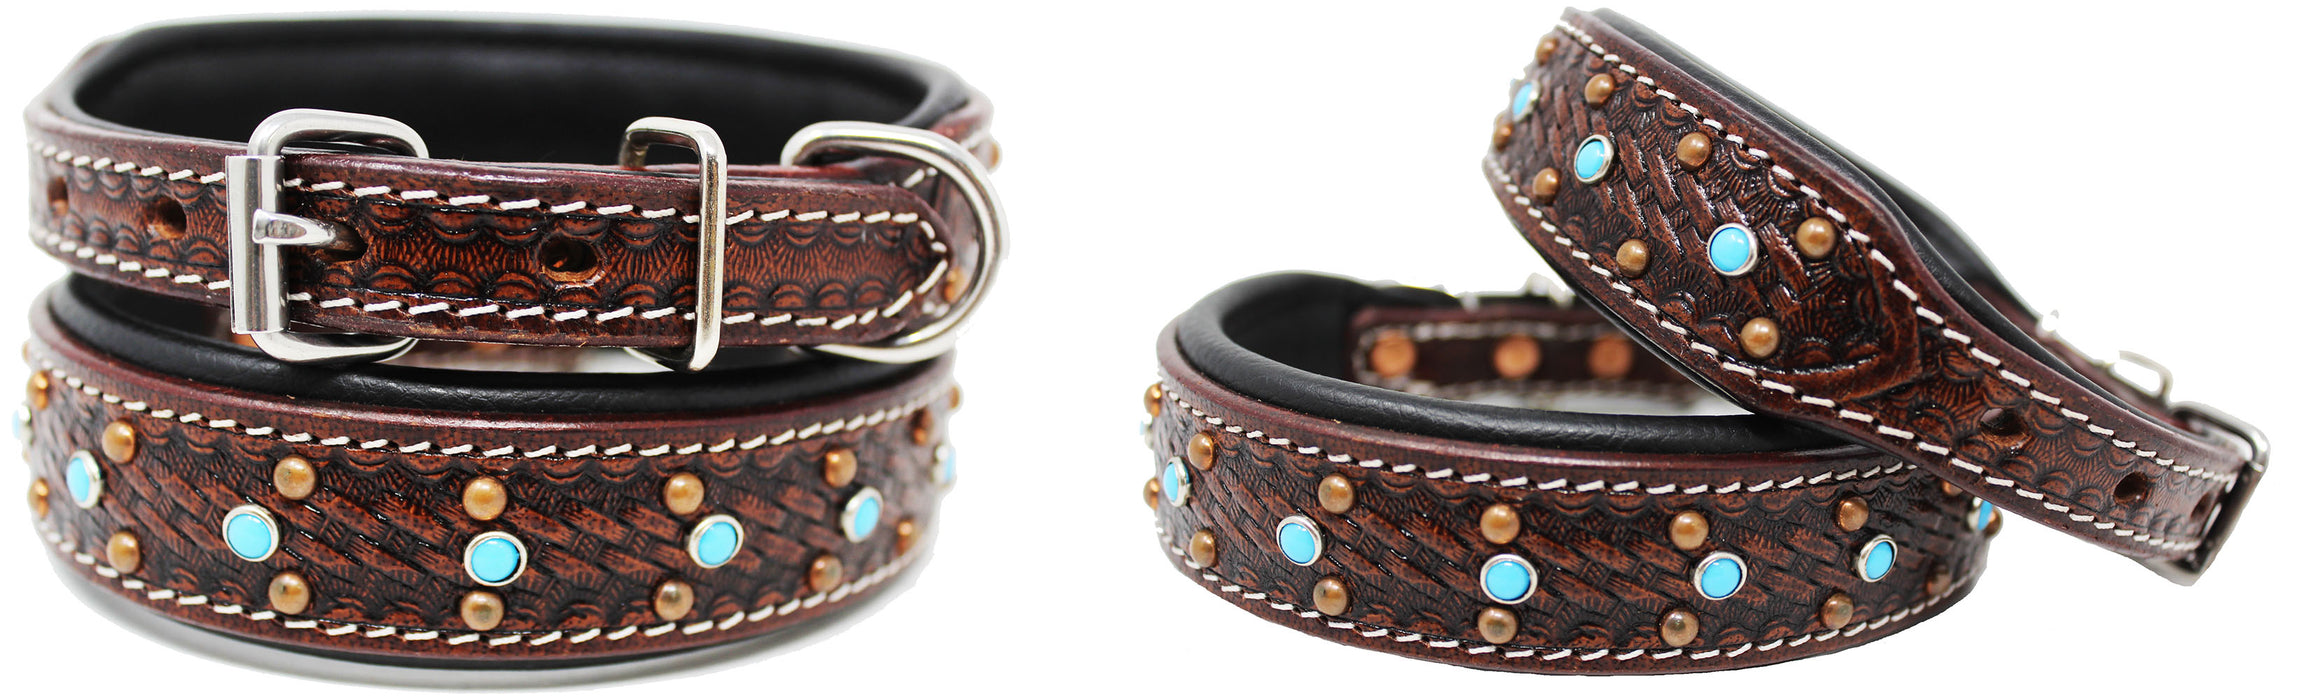 Dog Puppy Collar Genuine Cow Leather Padded Canine 6013